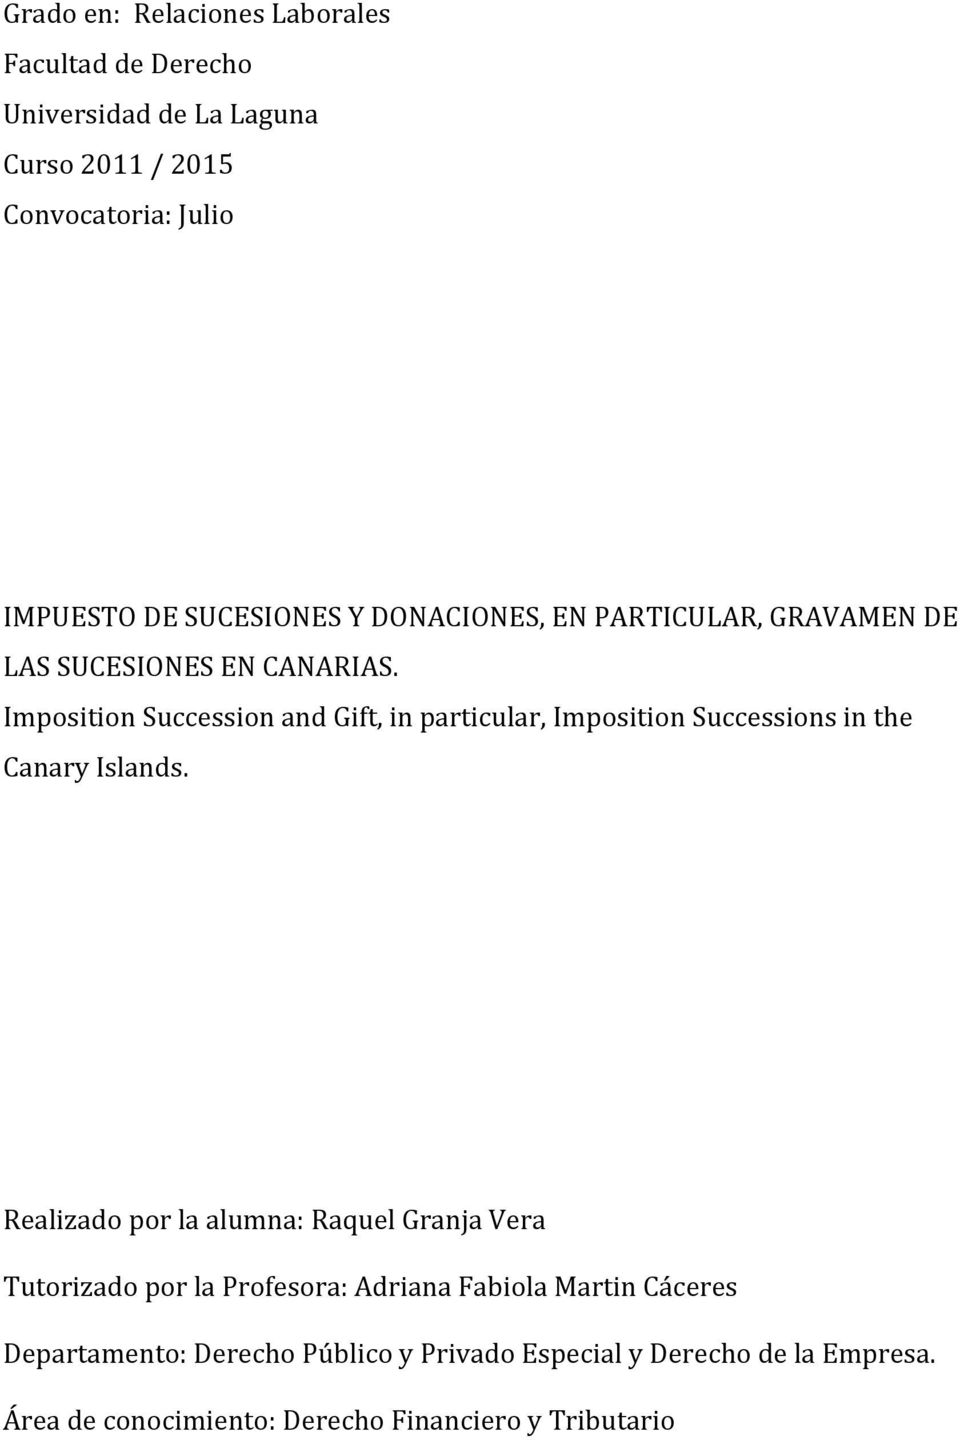 Imposition Succession and Gift, in particular, Imposition Successions in the Canary Islands.